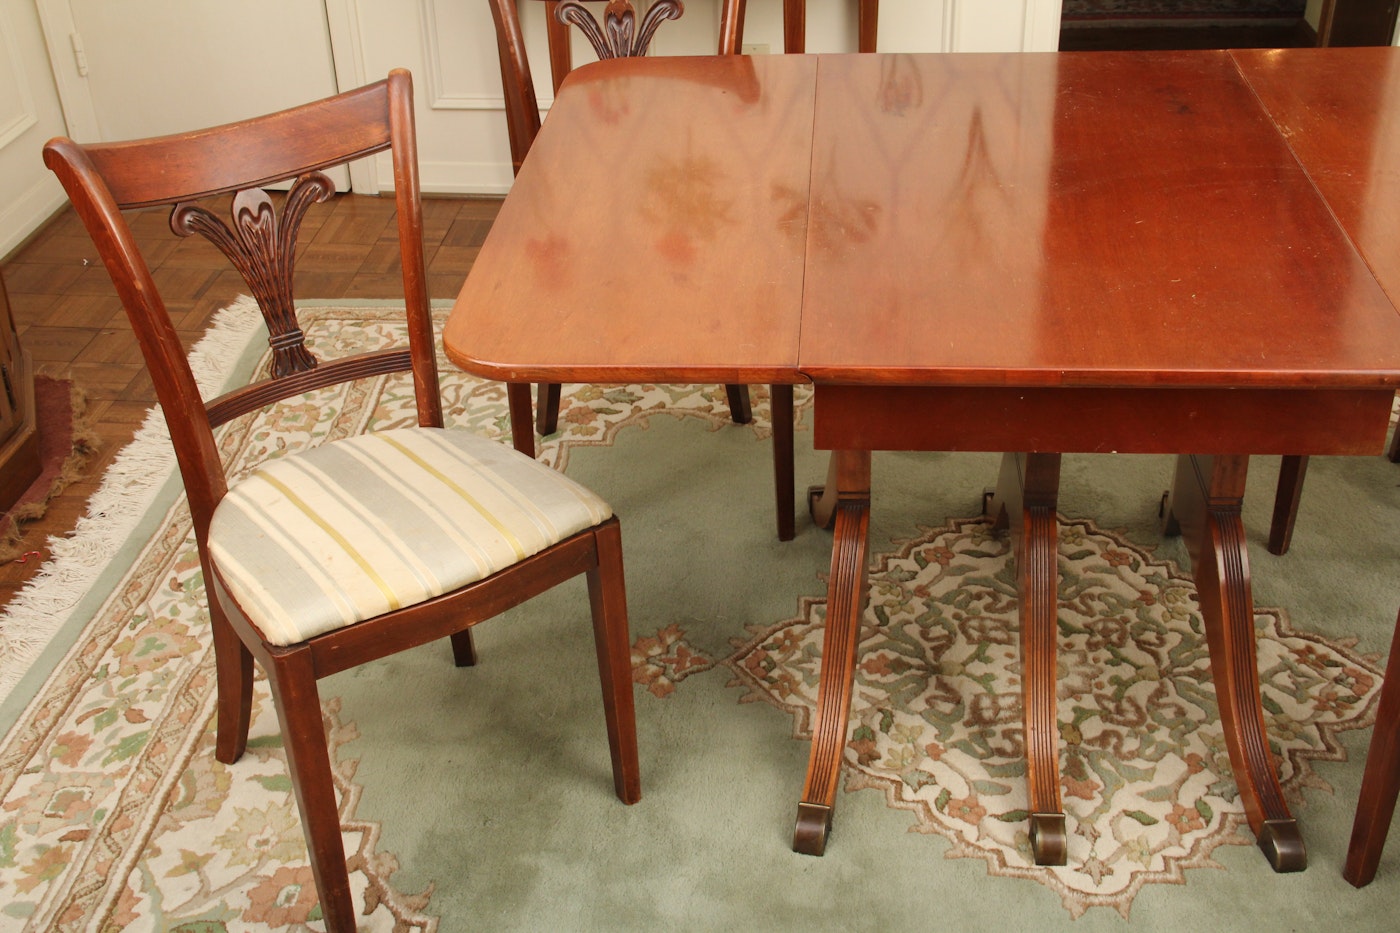 Duncan Phyfe Style Dining Room Table